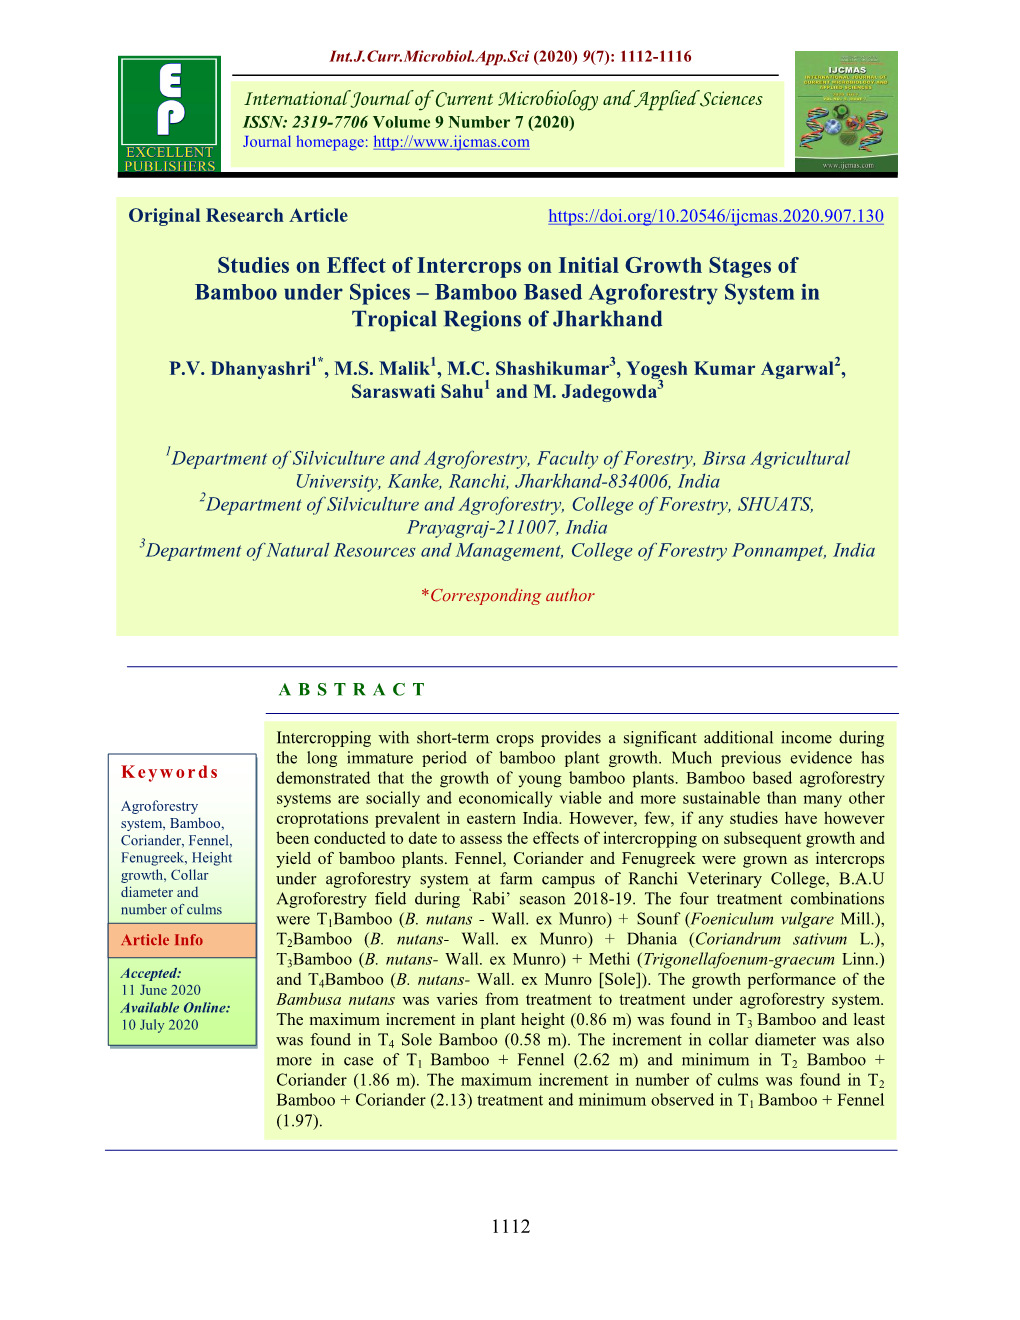 Studies on Effect of Intercrops on Initial Growth Stages of Bamboo Under Spices – Bamboo Based Agroforestry System in Tropical Regions of Jharkhand